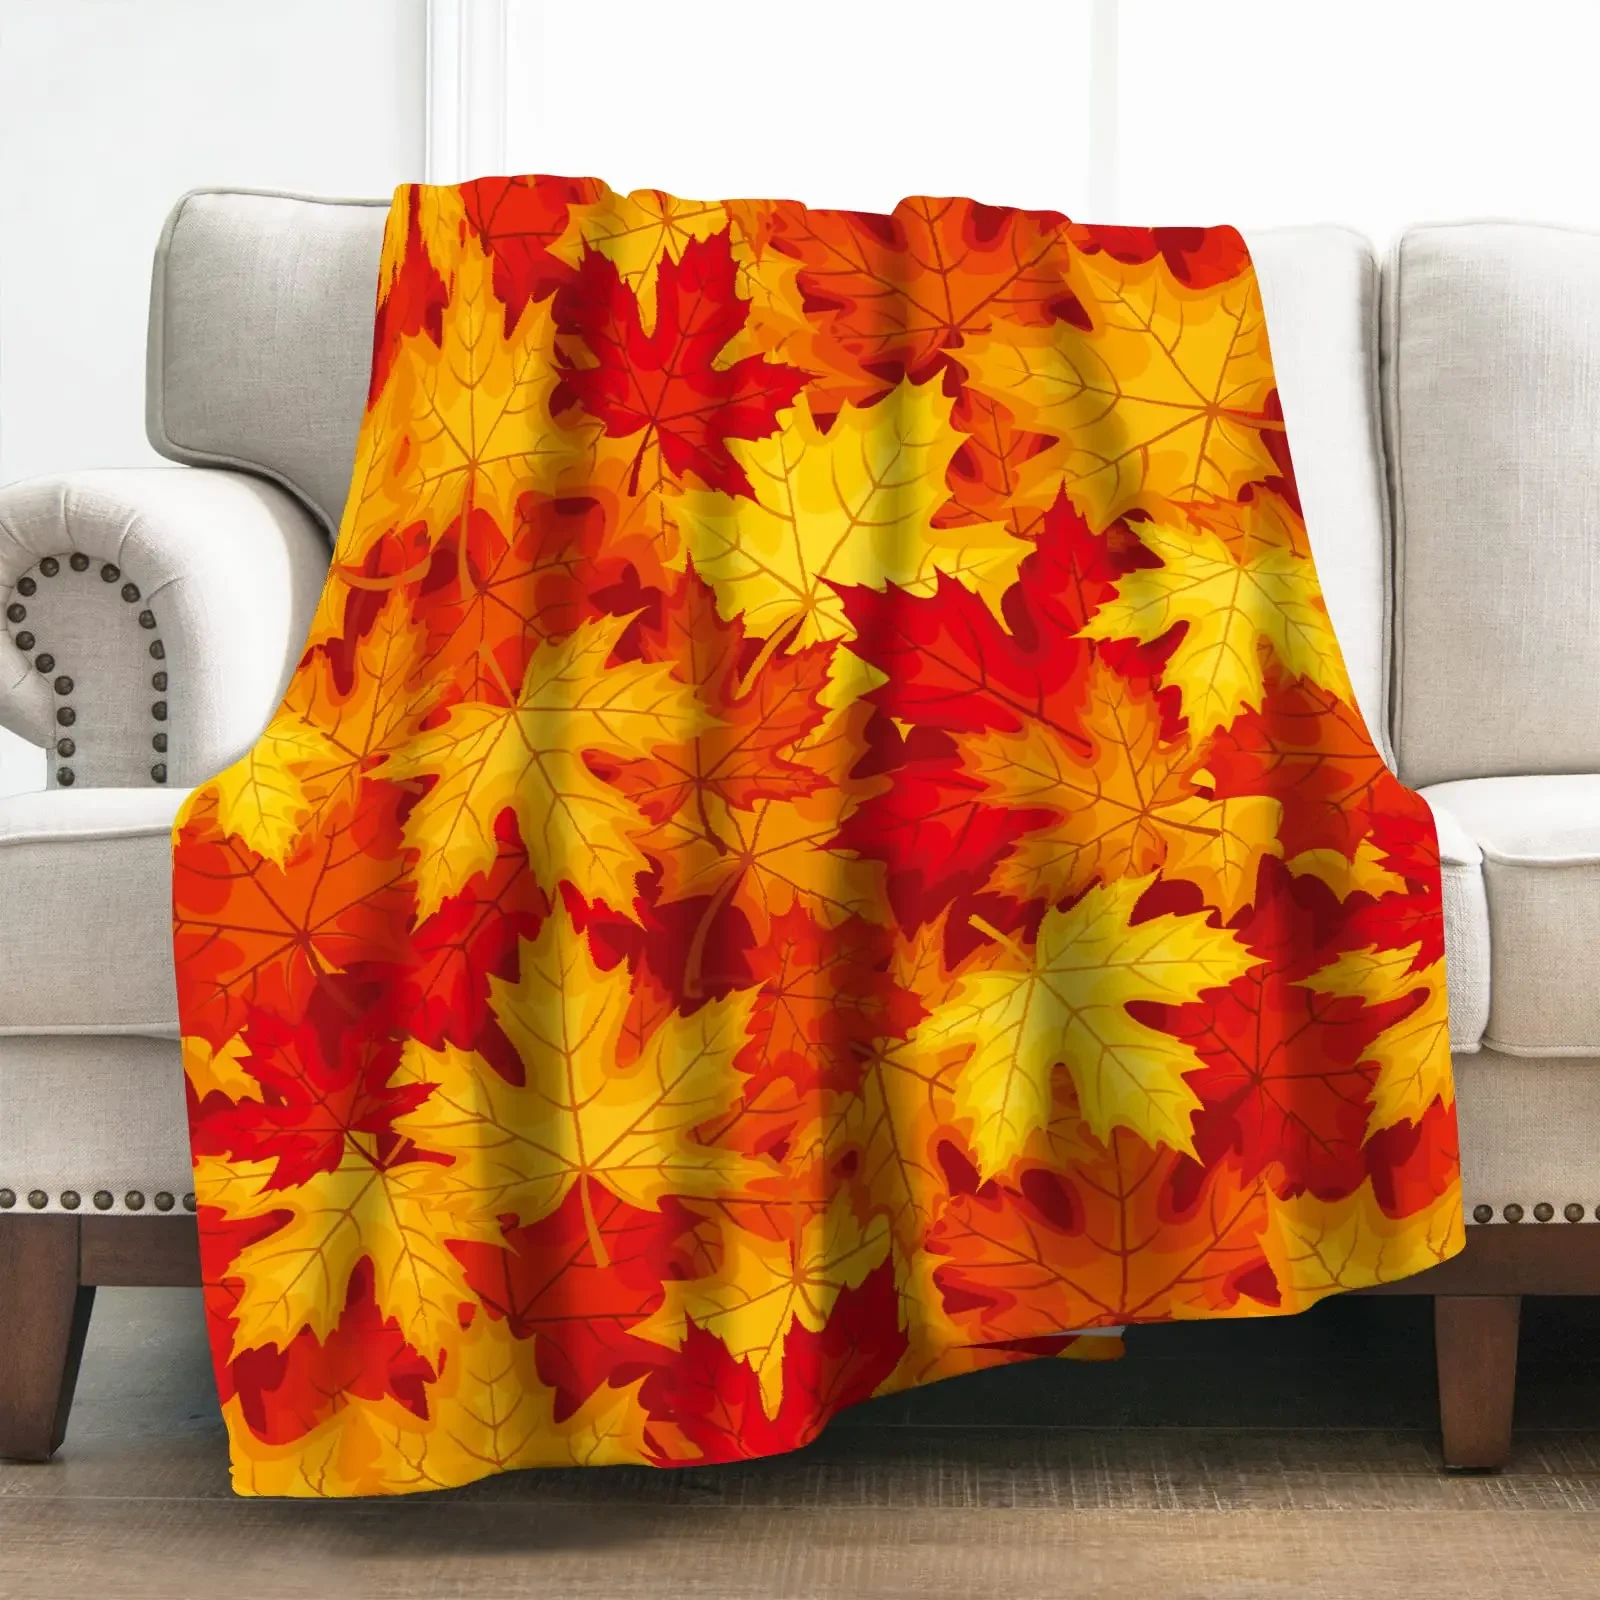 

Maple Leaves Blanket Gift for Girls Boys,Autumn Fall Maple Leaf Thanksgiving Day Halloween Soft Throw Blanket for Couch Bed Sofa